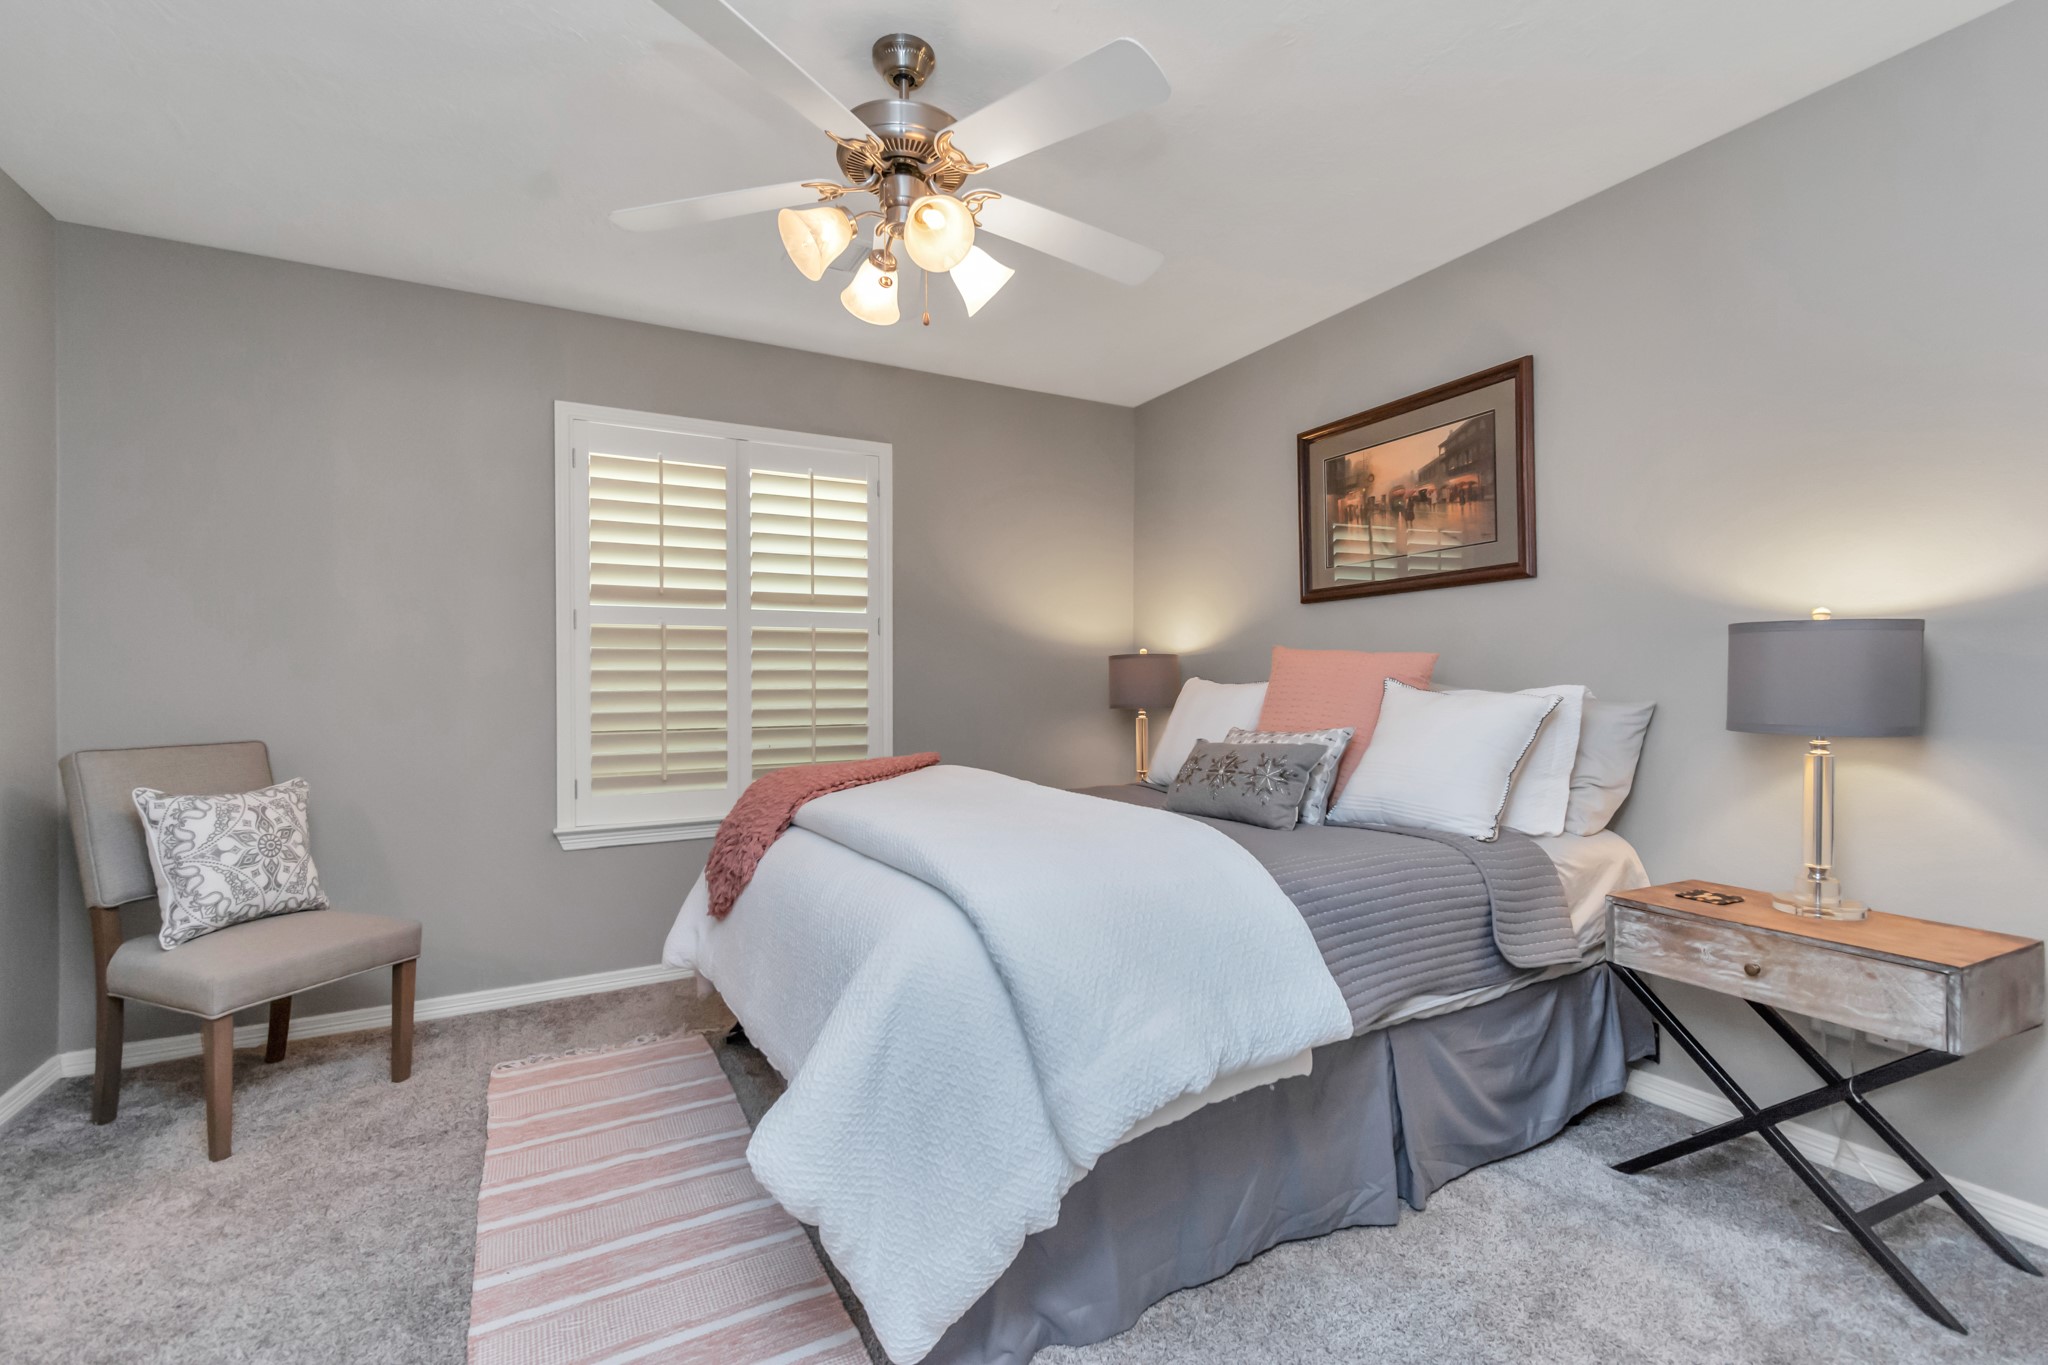 The other secondary bedroom, like all bedrooms in this home, features neutral, updated carpeting and ceiling fans. All bedrooms have substantial closets.